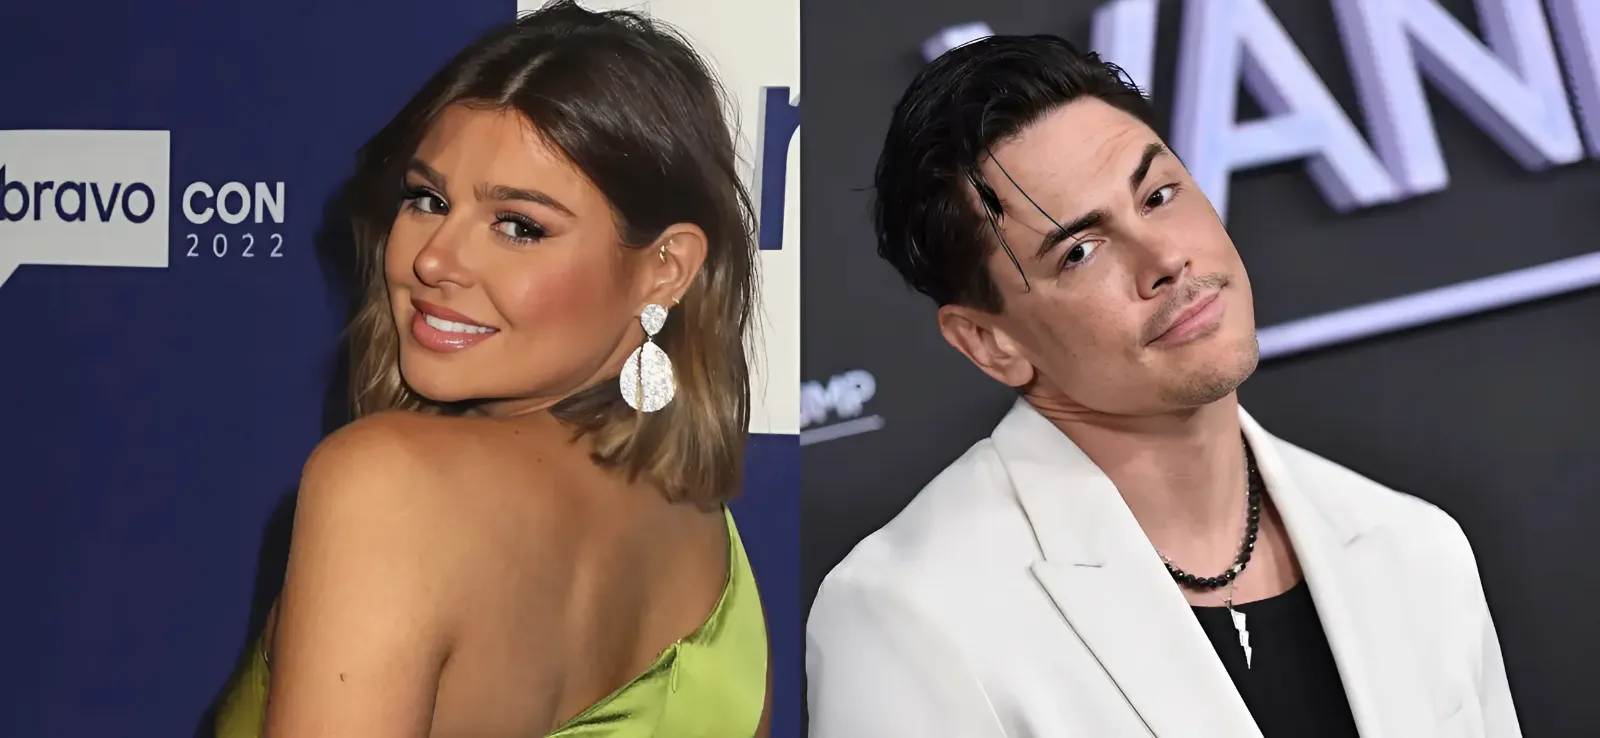 Rachel Leviss Says It's Been 'Hard' To Date 'A Sweet Guy' Since The Tom Sandoval Affair Scandal